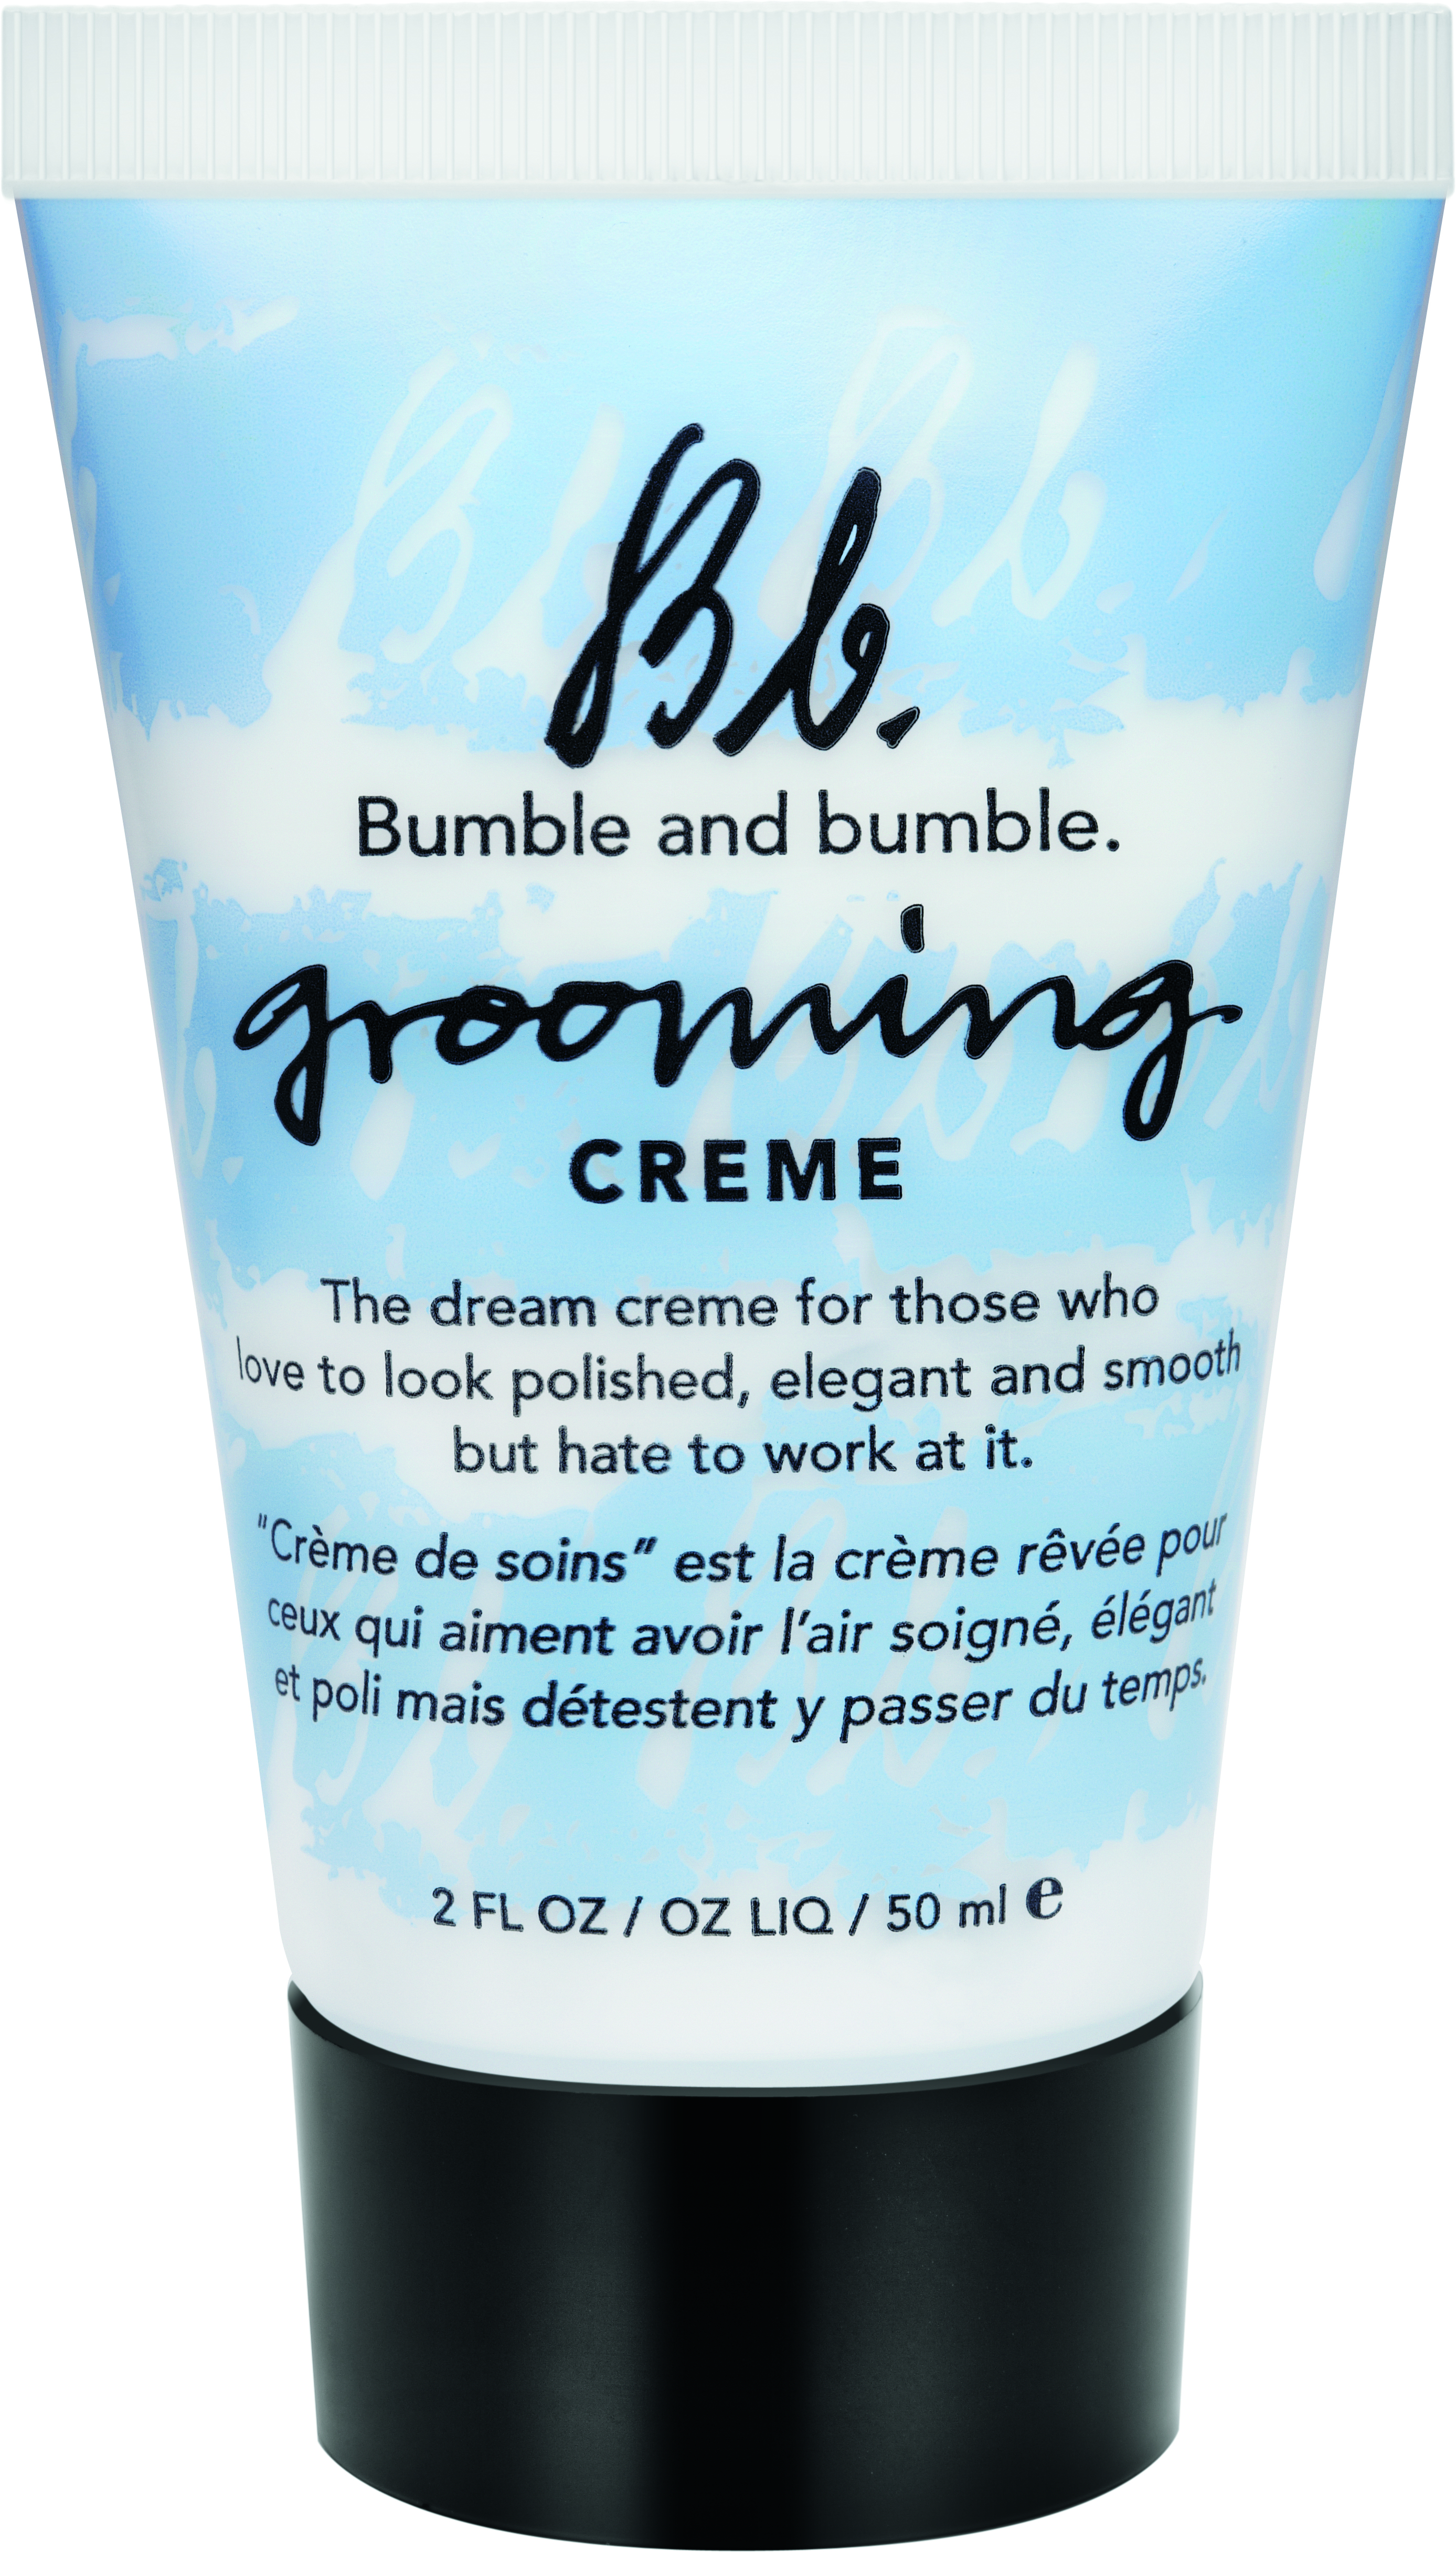 Bumble and bumble Grooming Creme 50ml